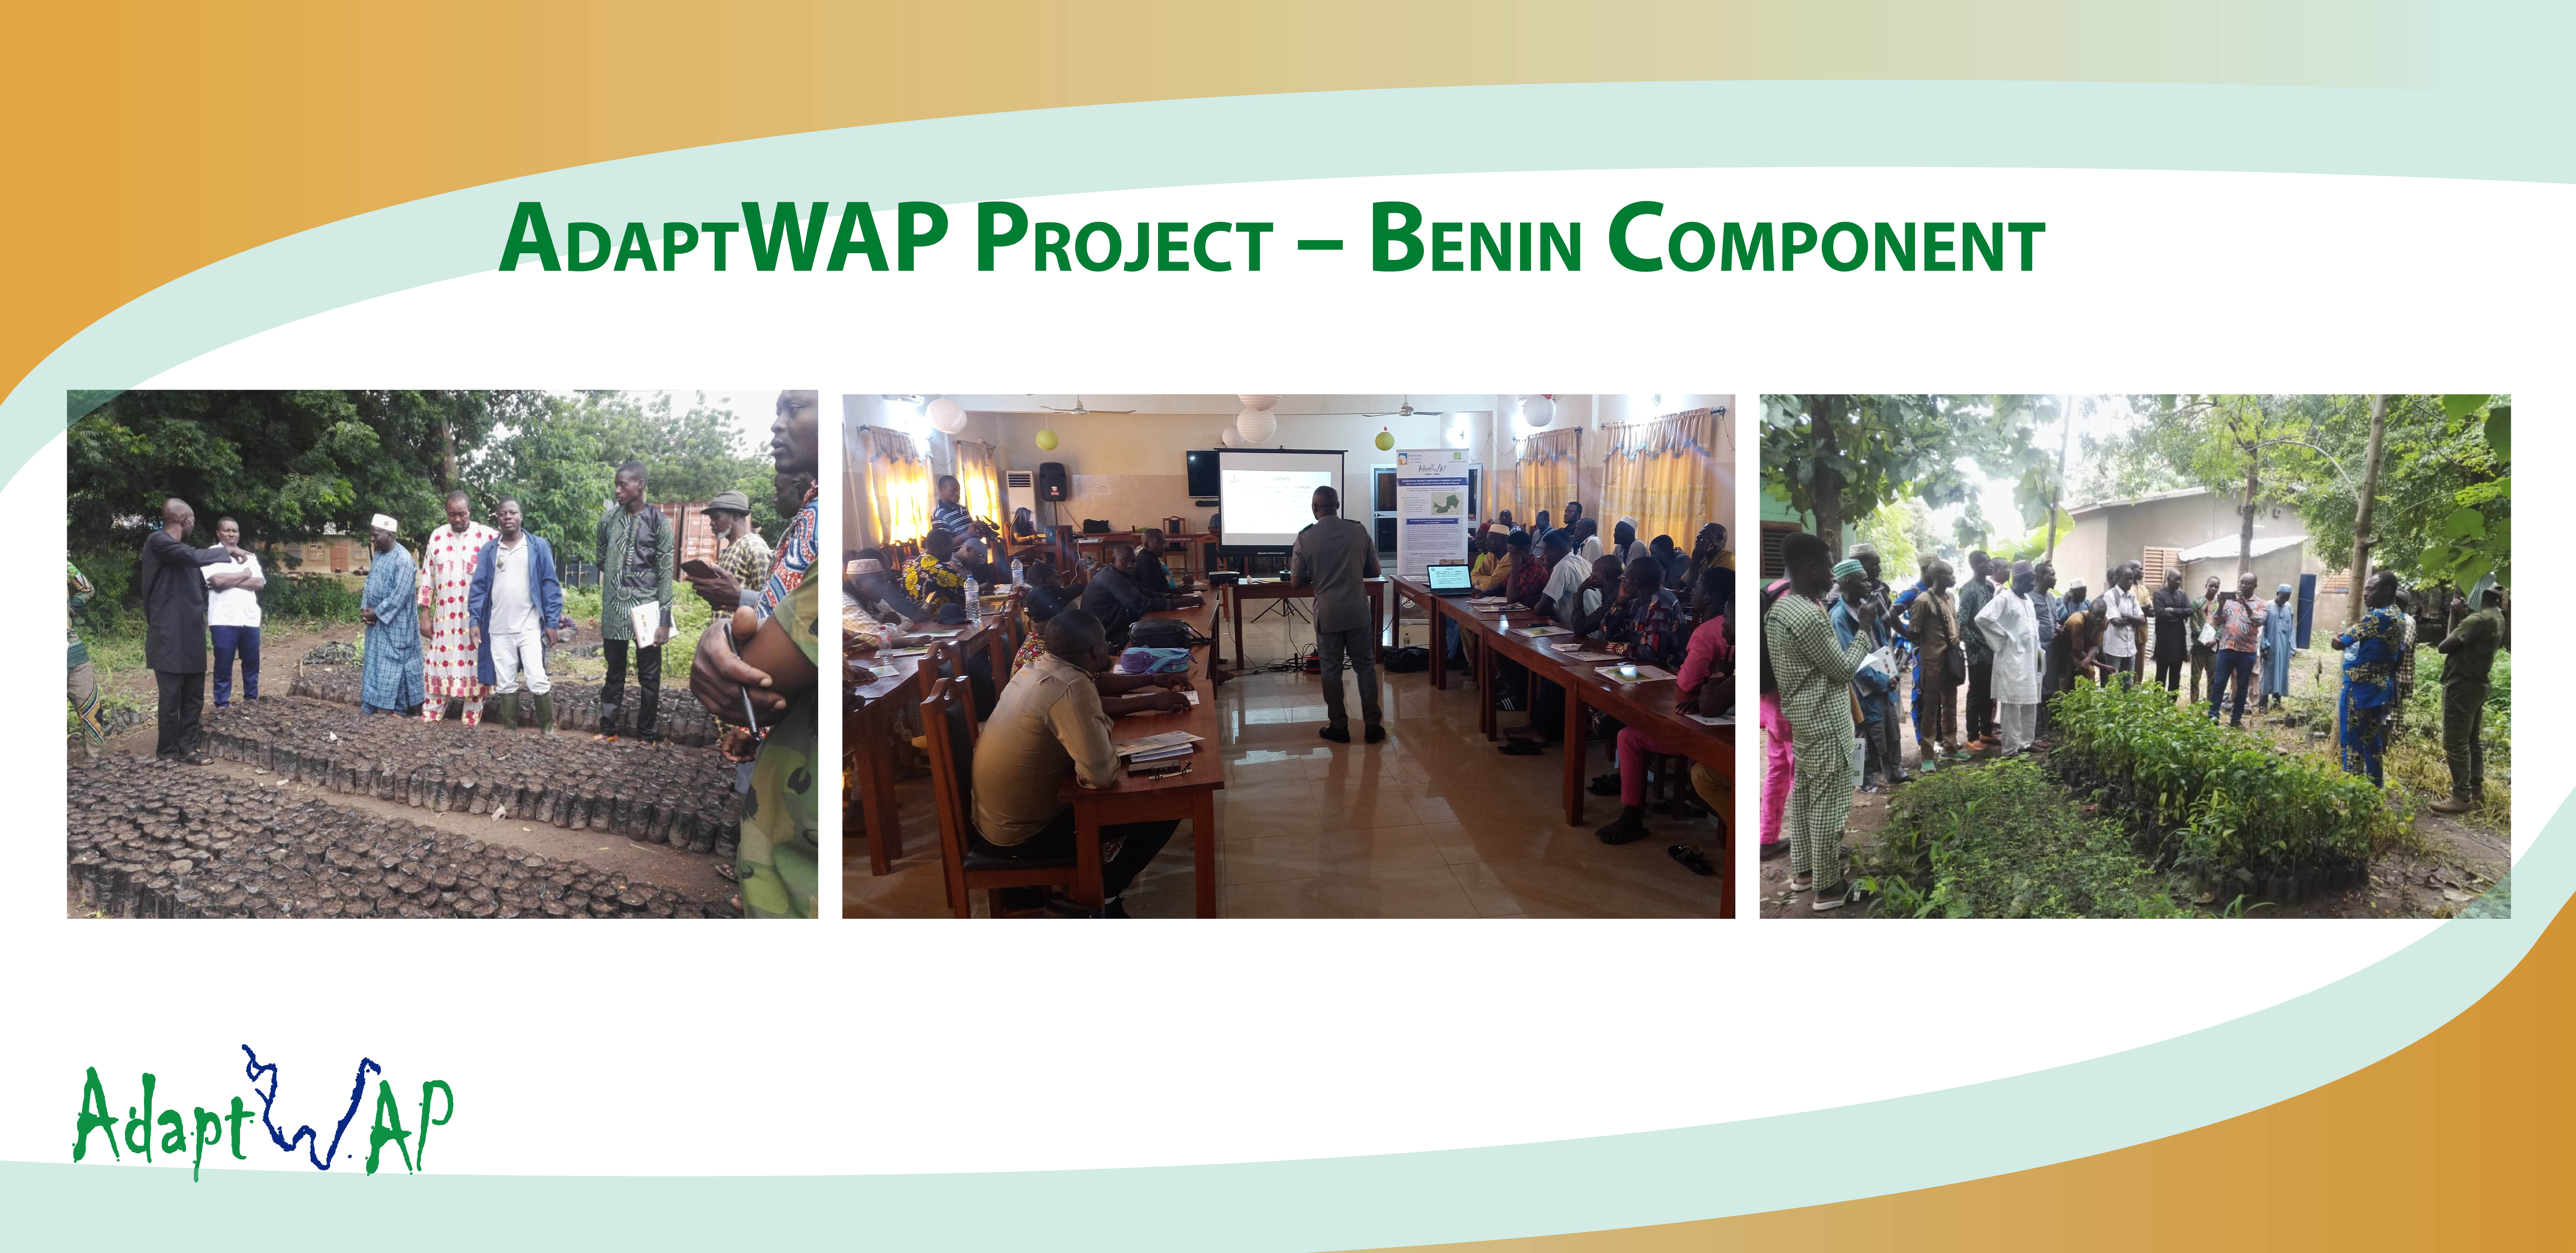  AdaptWAP project : Producers in the Benin component learn about the agroforestry and small-scale irrigation techniques - September 2022